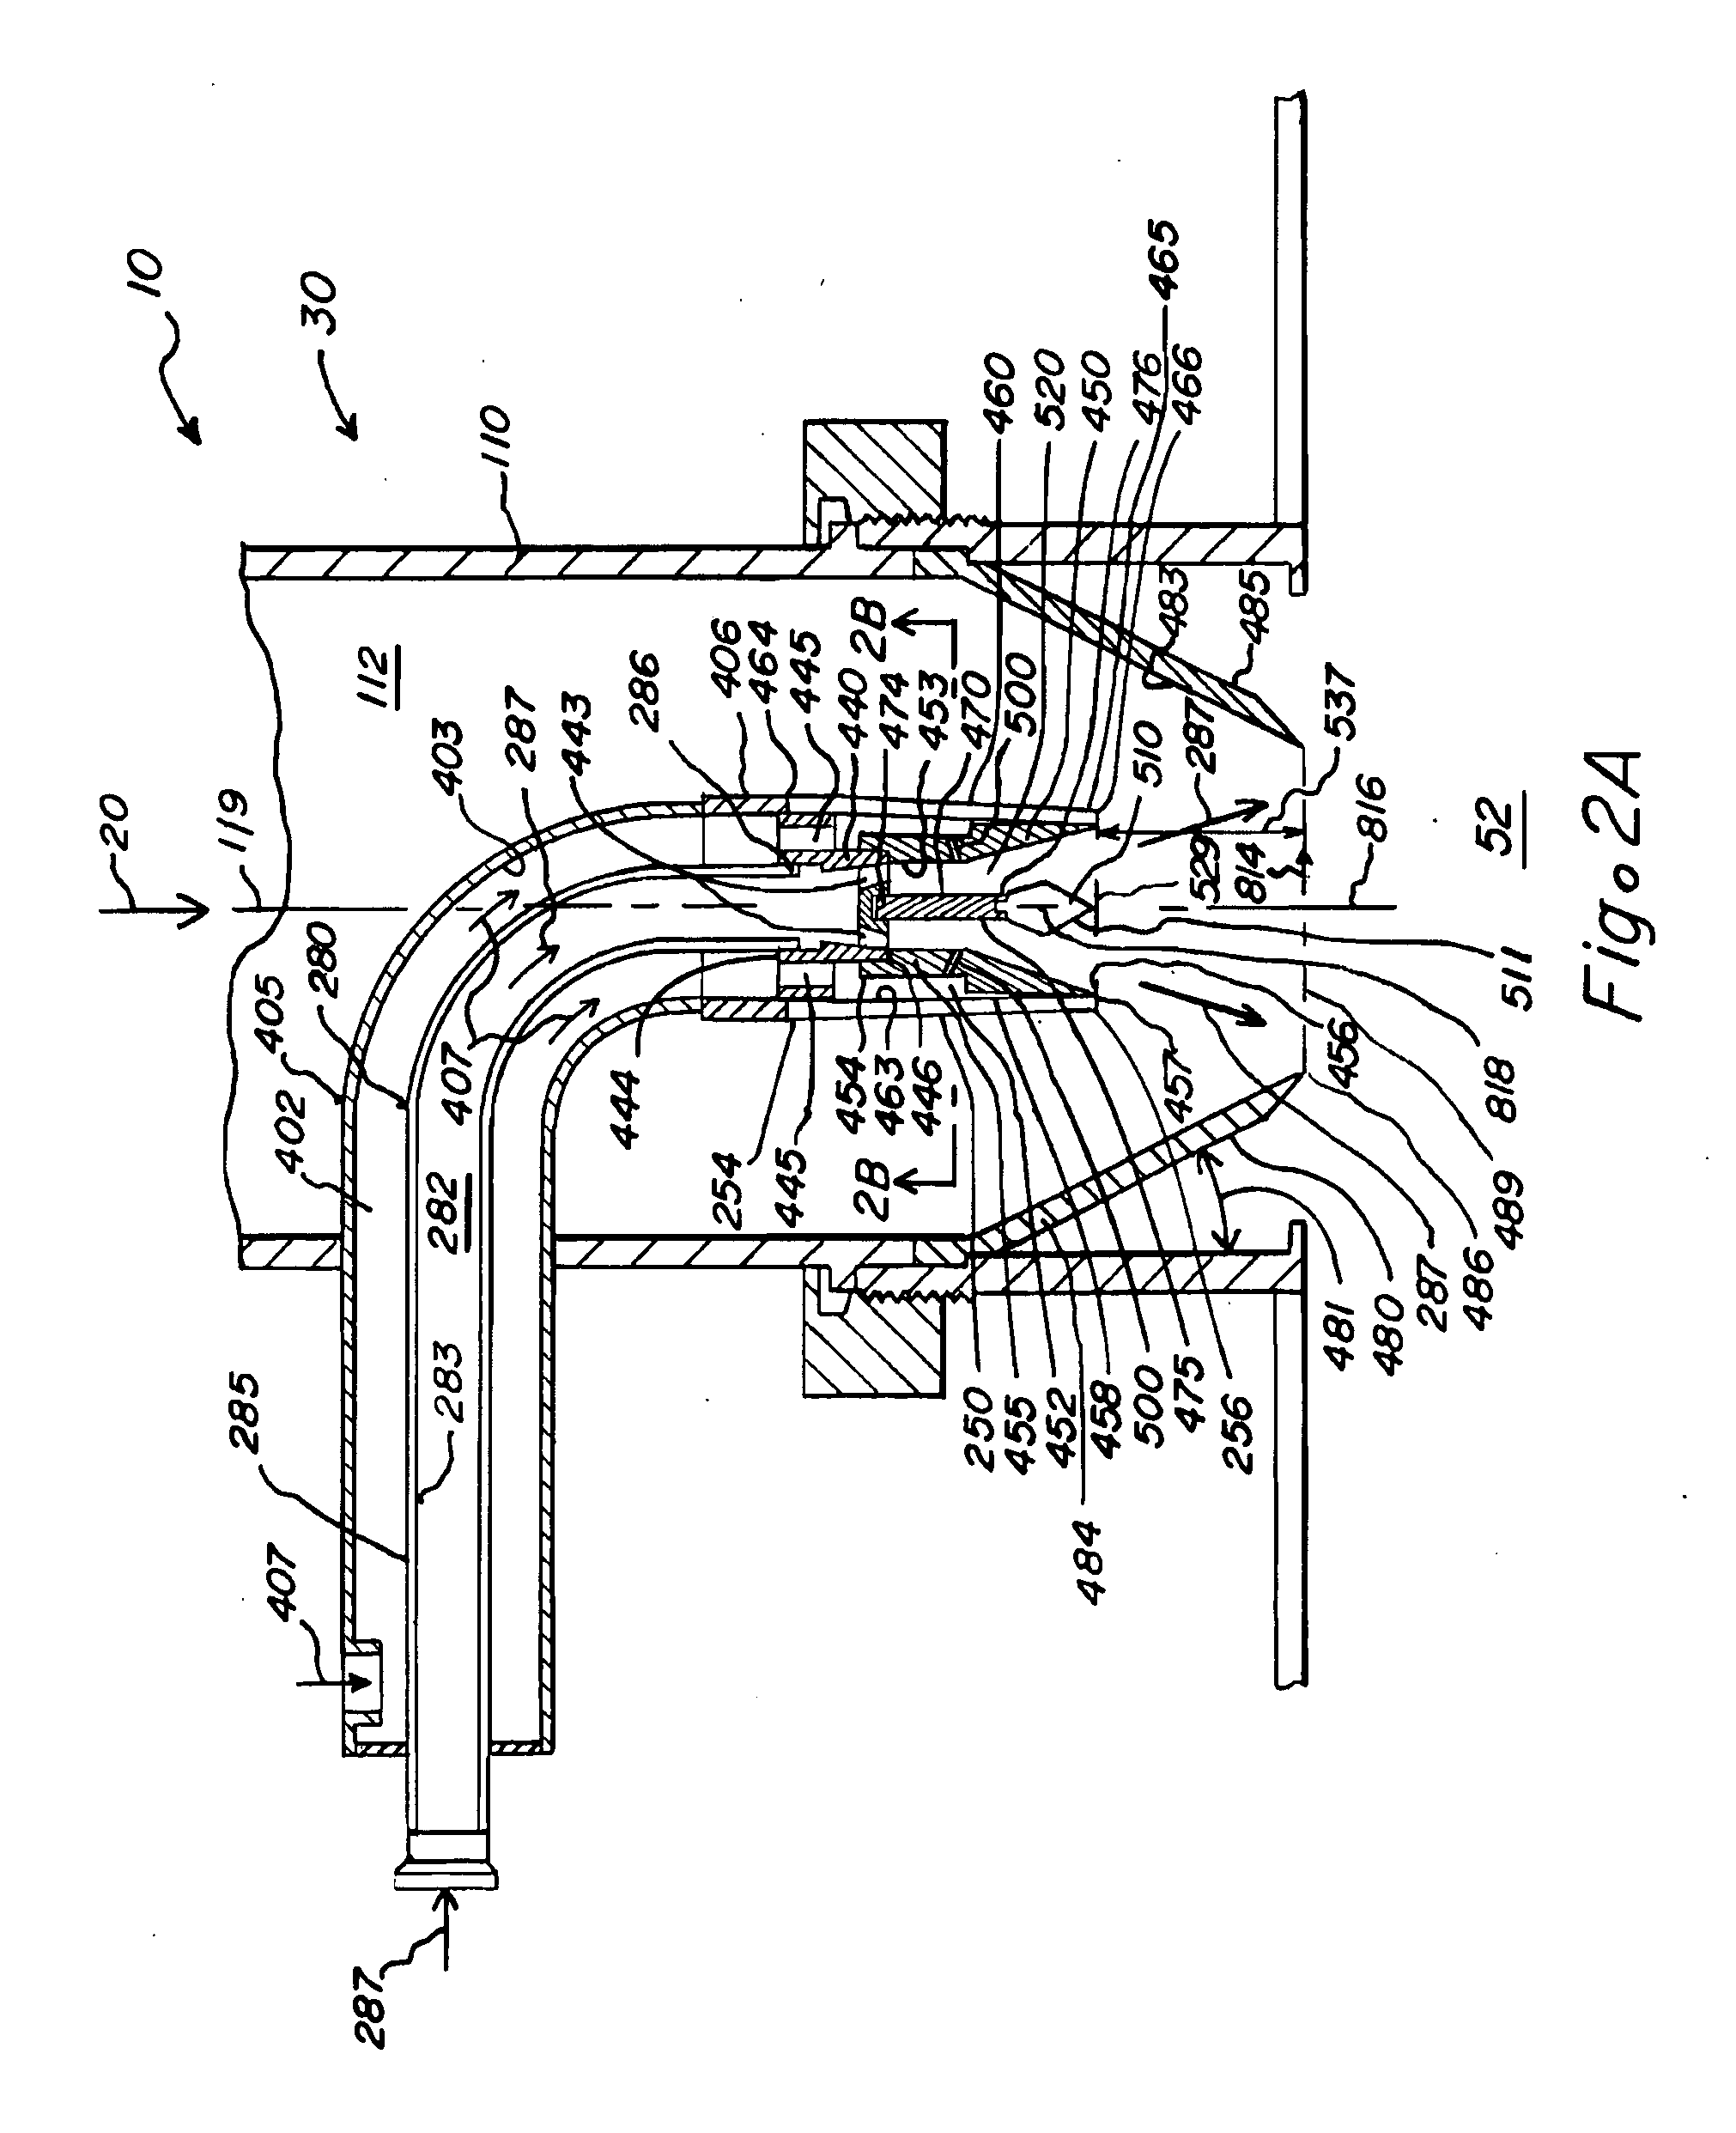 Nozzle apparatus for material dispersion in a dryer and methods for drying materials